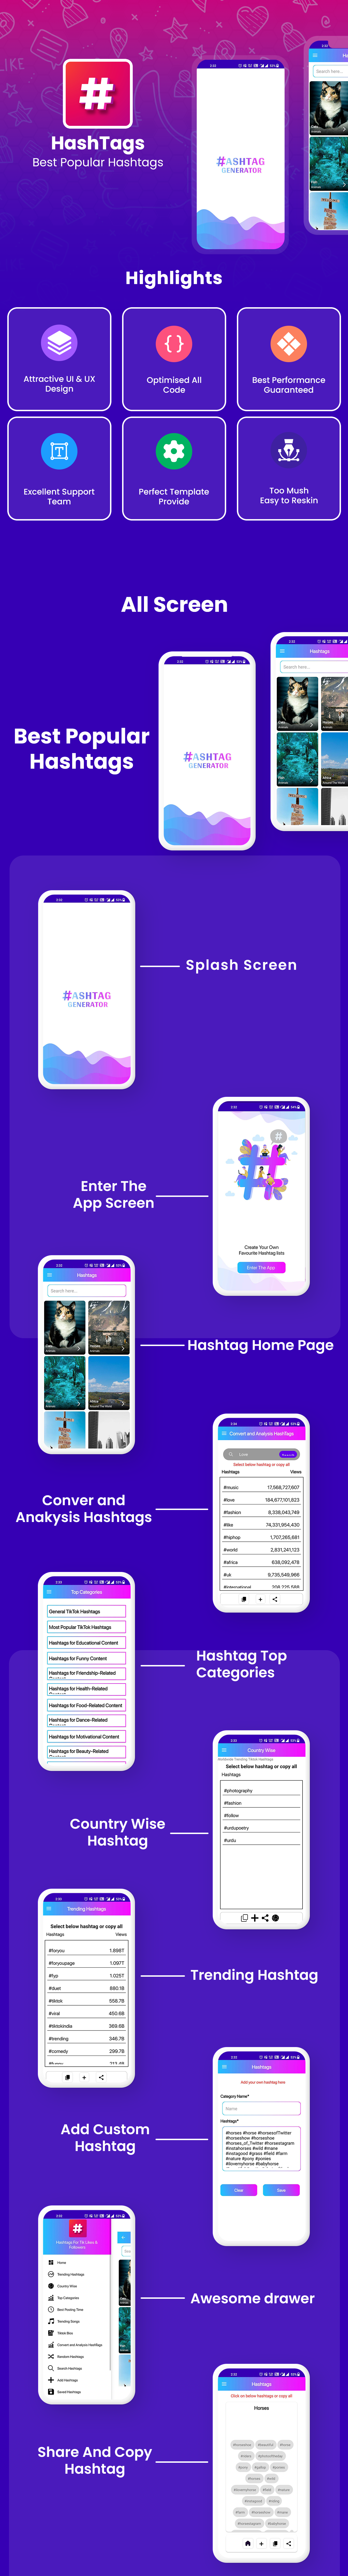 Hashtag Manager | Popular Hashtag For Insta | Android |admob ads - 1